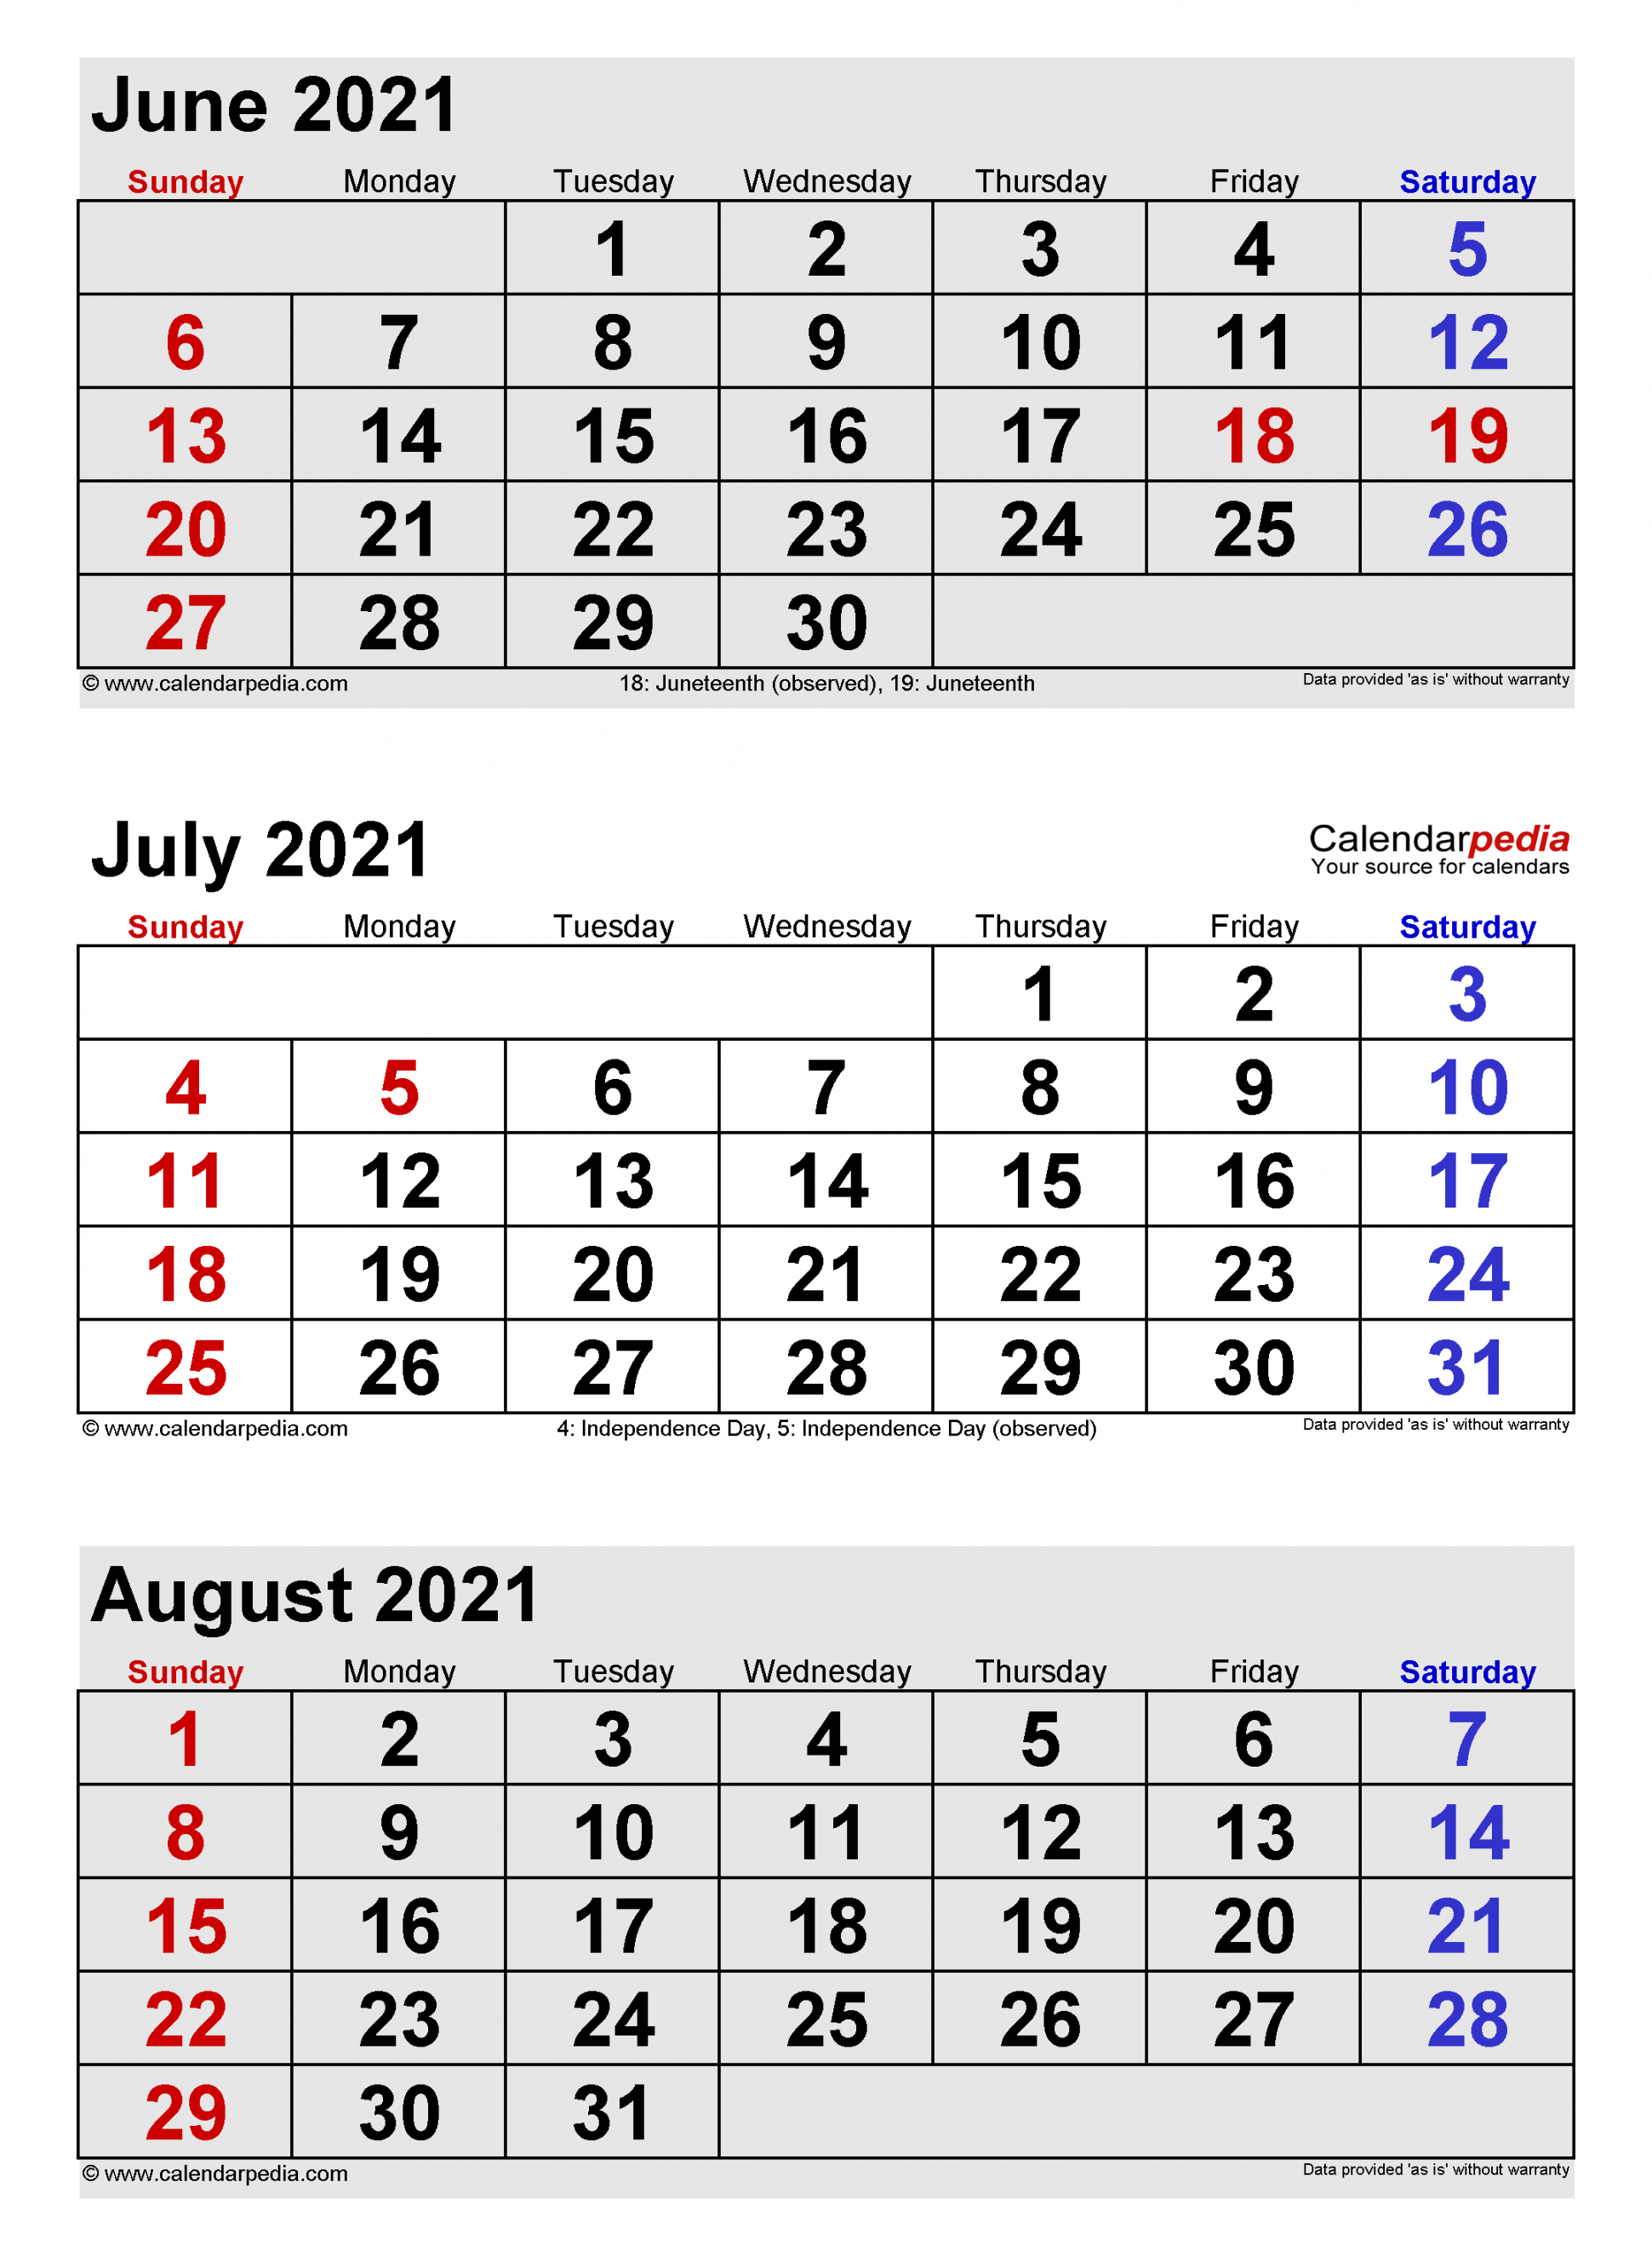 July  Calendar  Templates for Word, Excel and PDF